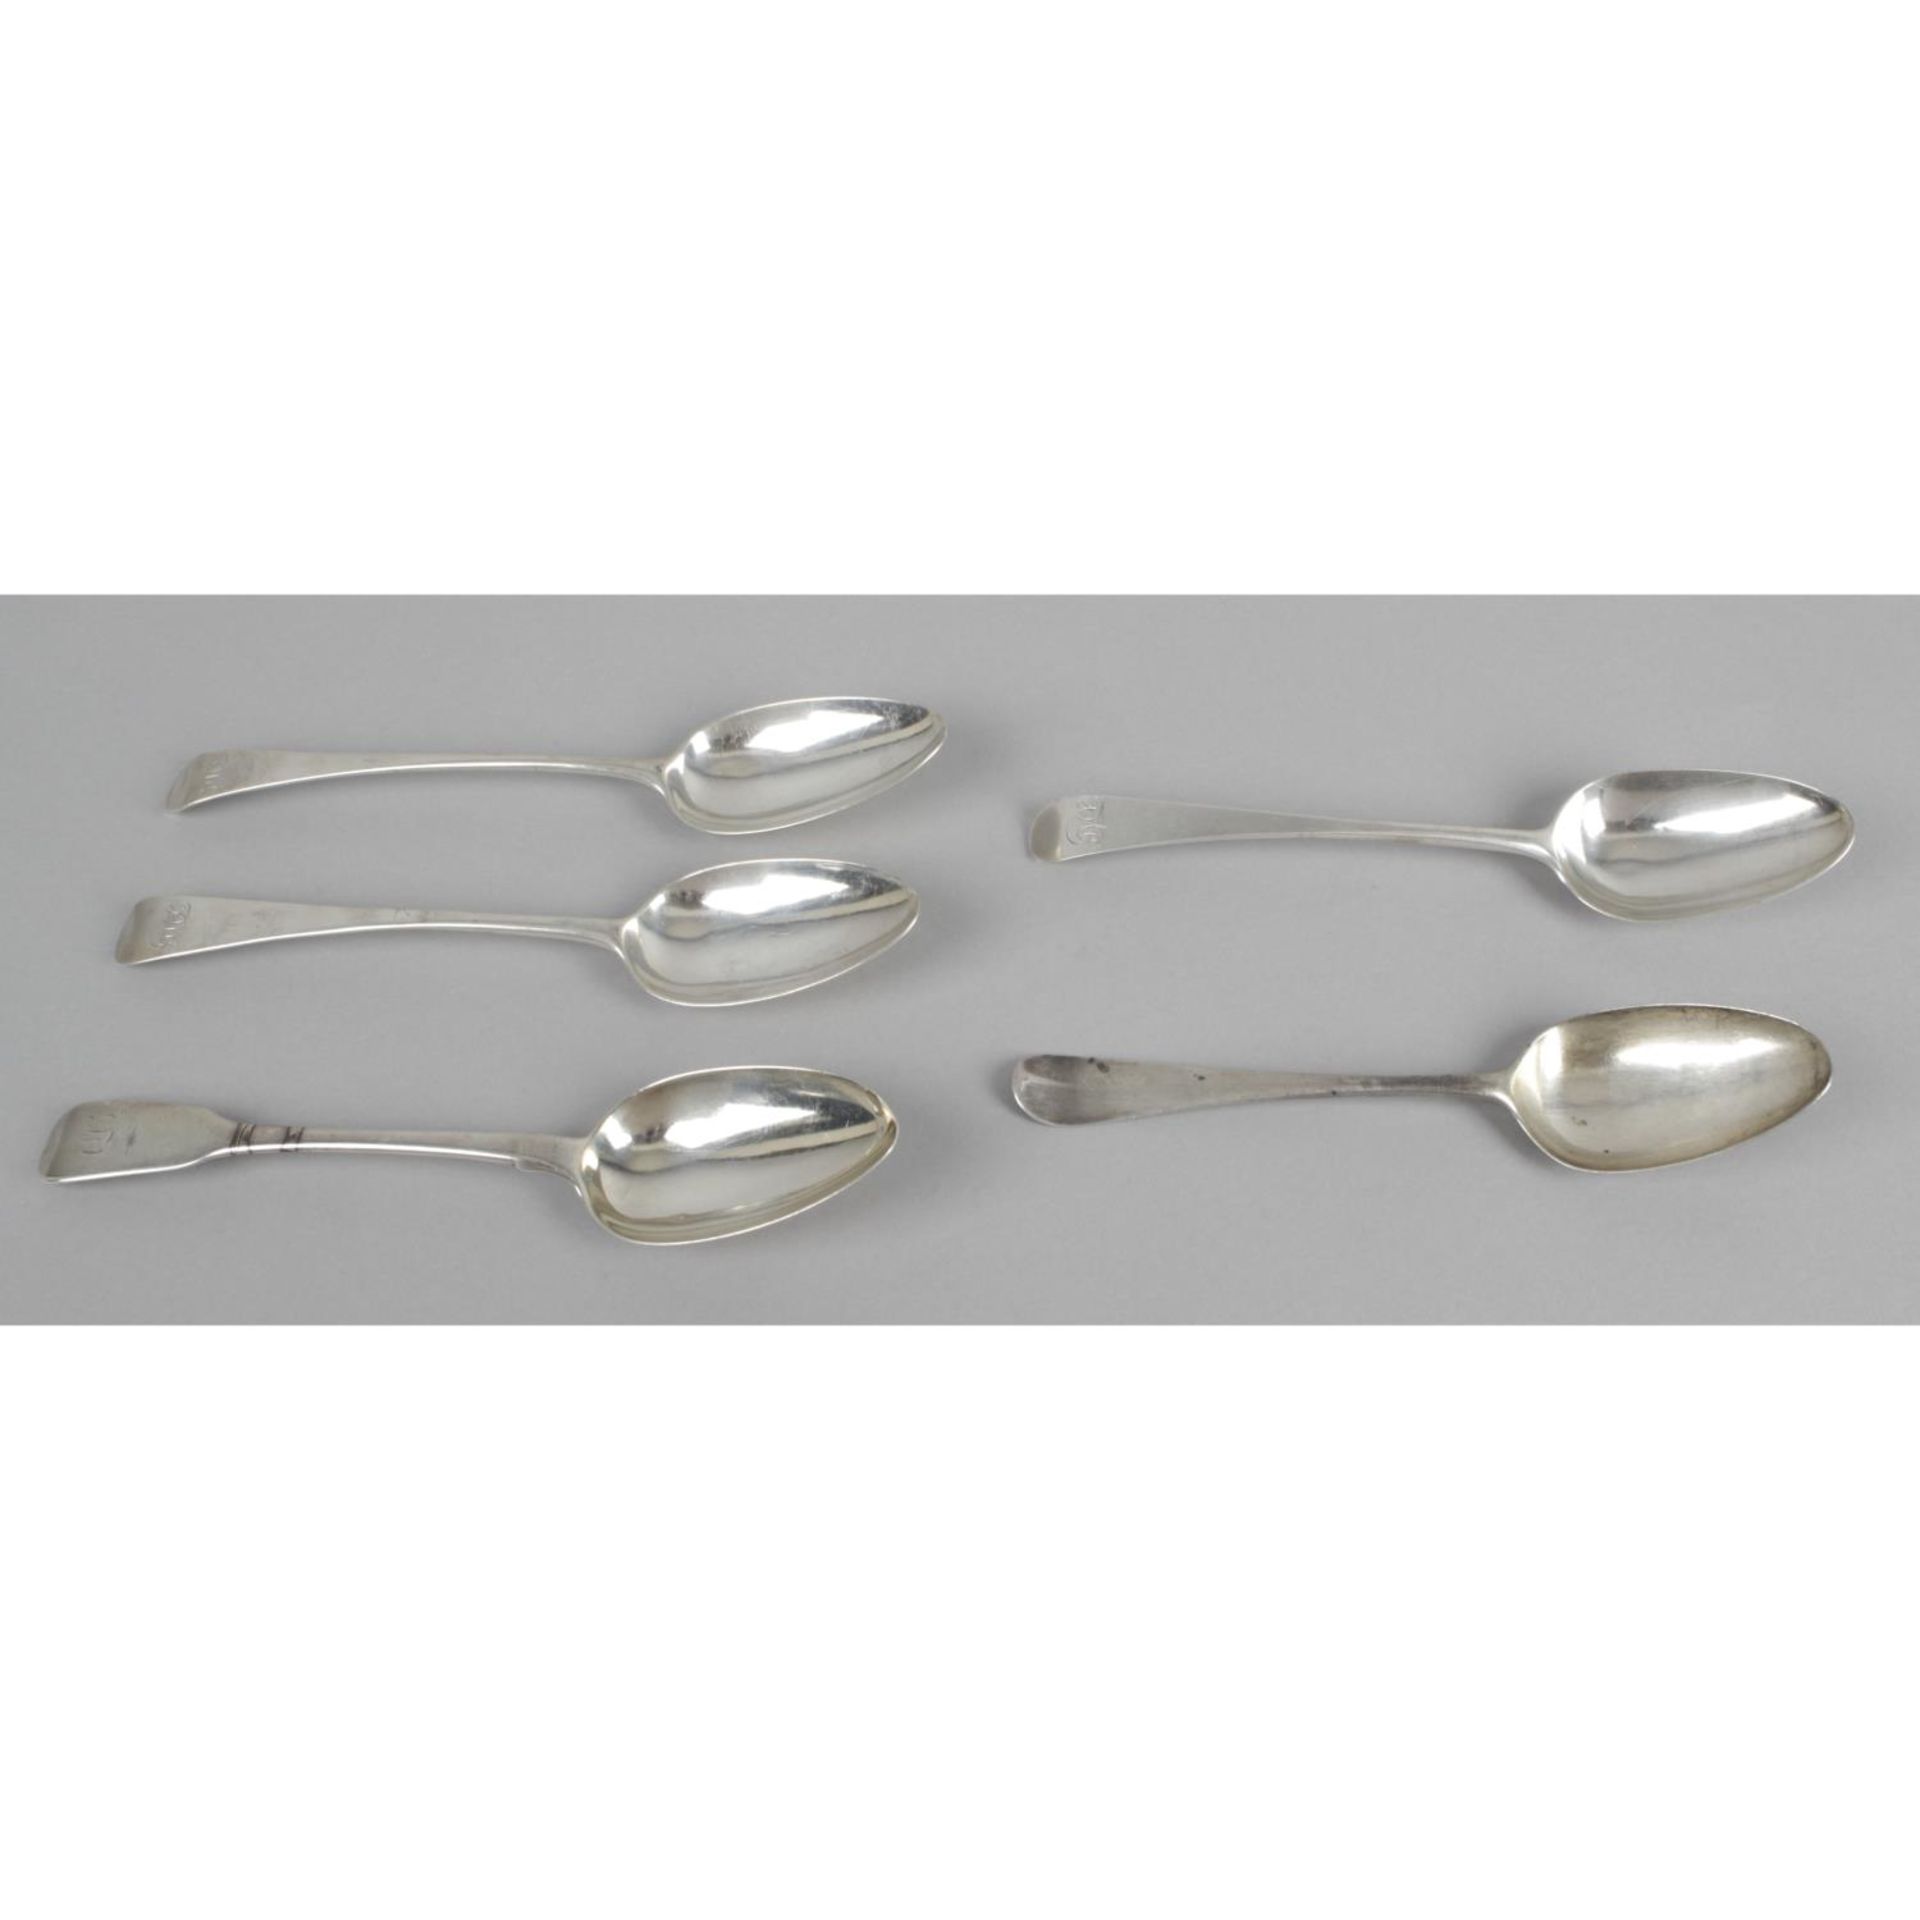 A selection of silver table spoons and dessert spoons, - Image 4 of 4